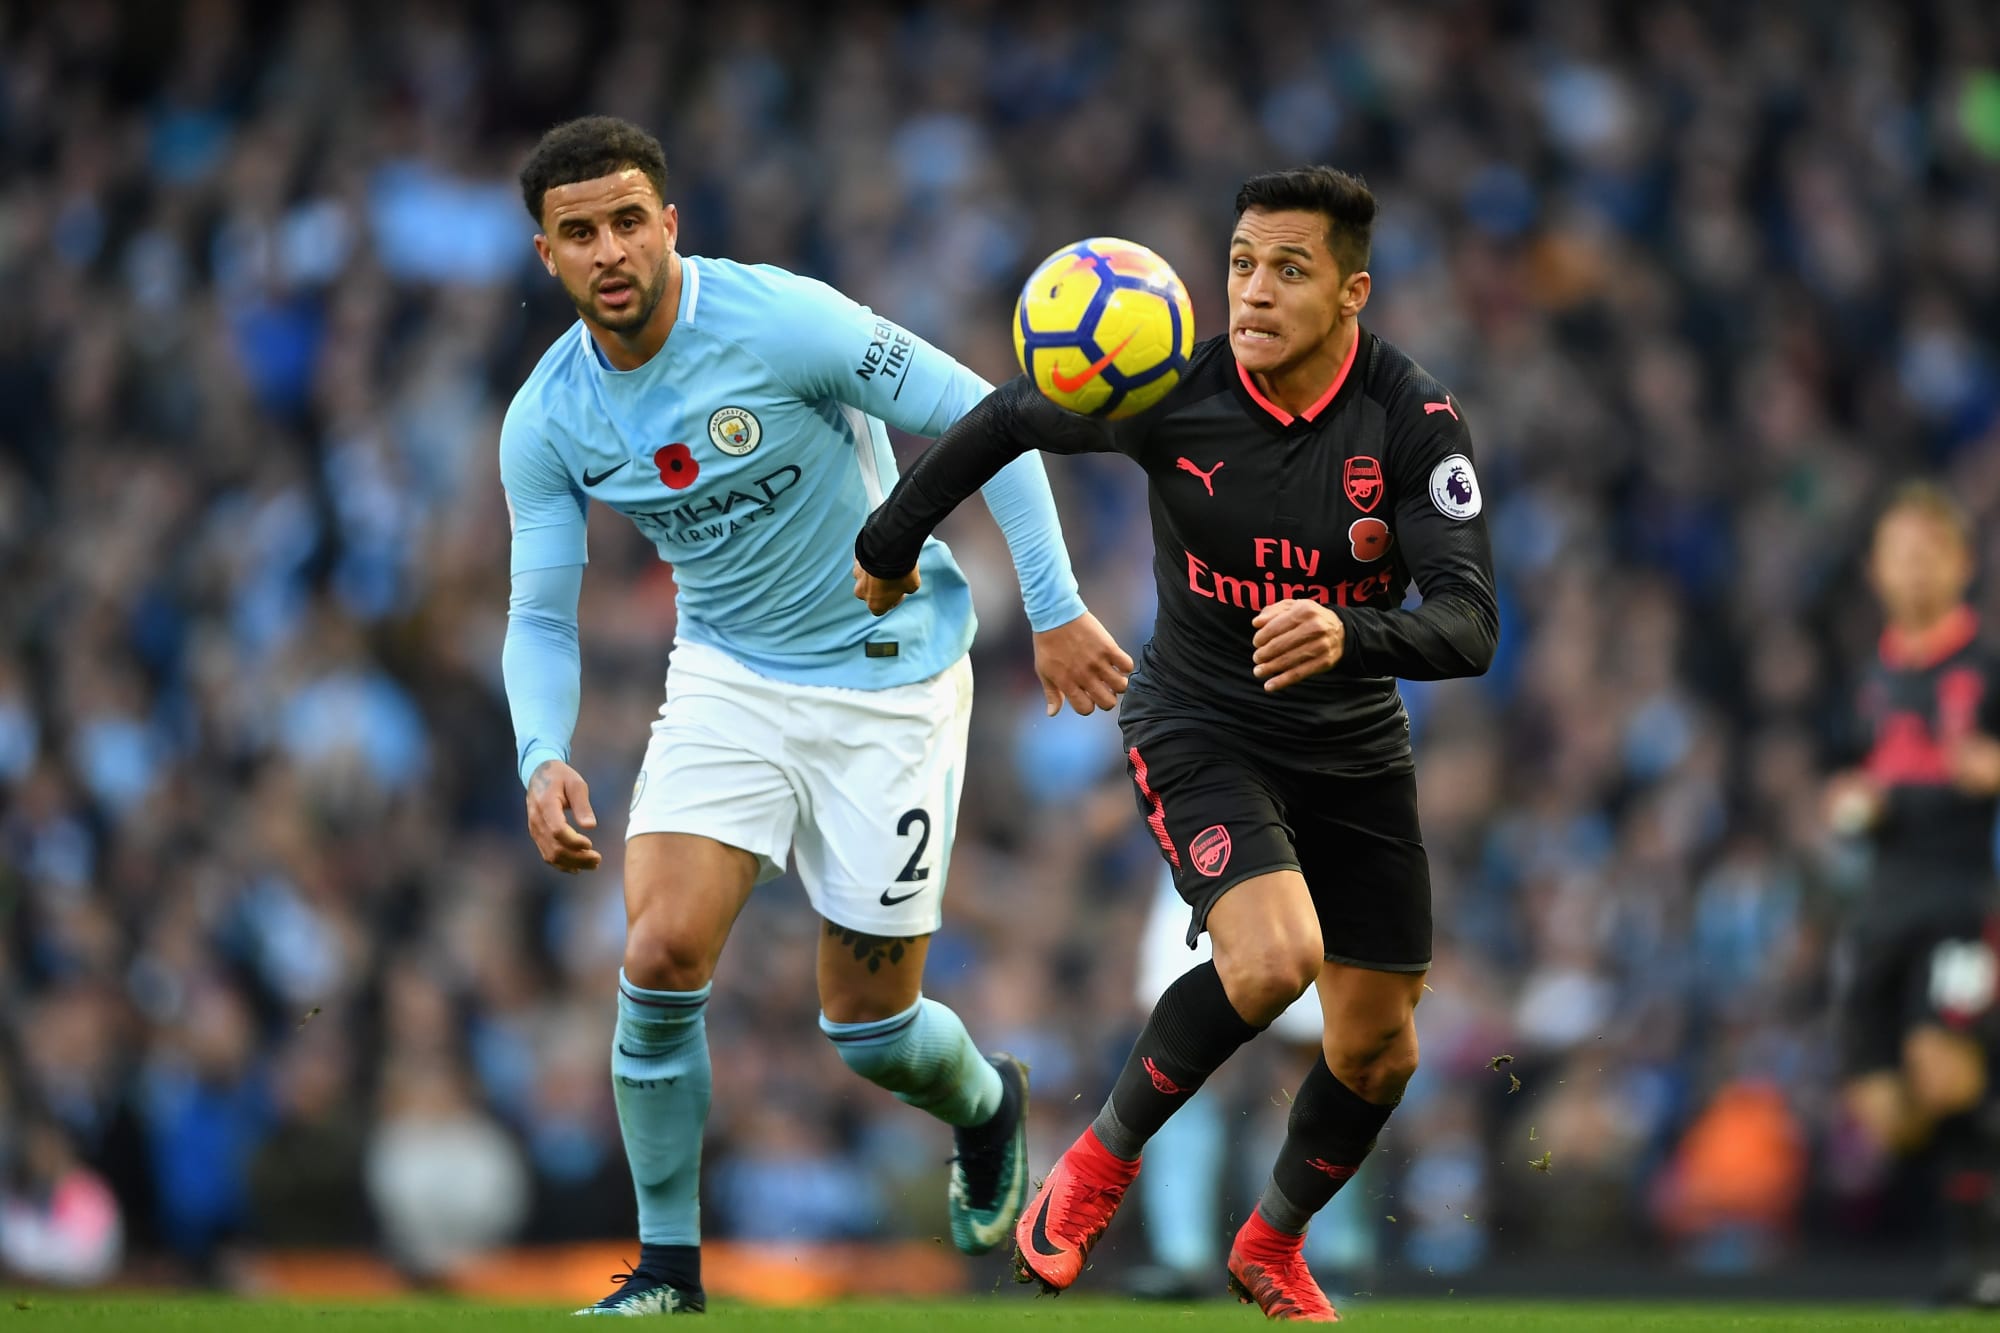 Arsenal Vs Manchester City The key tactical inconsistency exposed